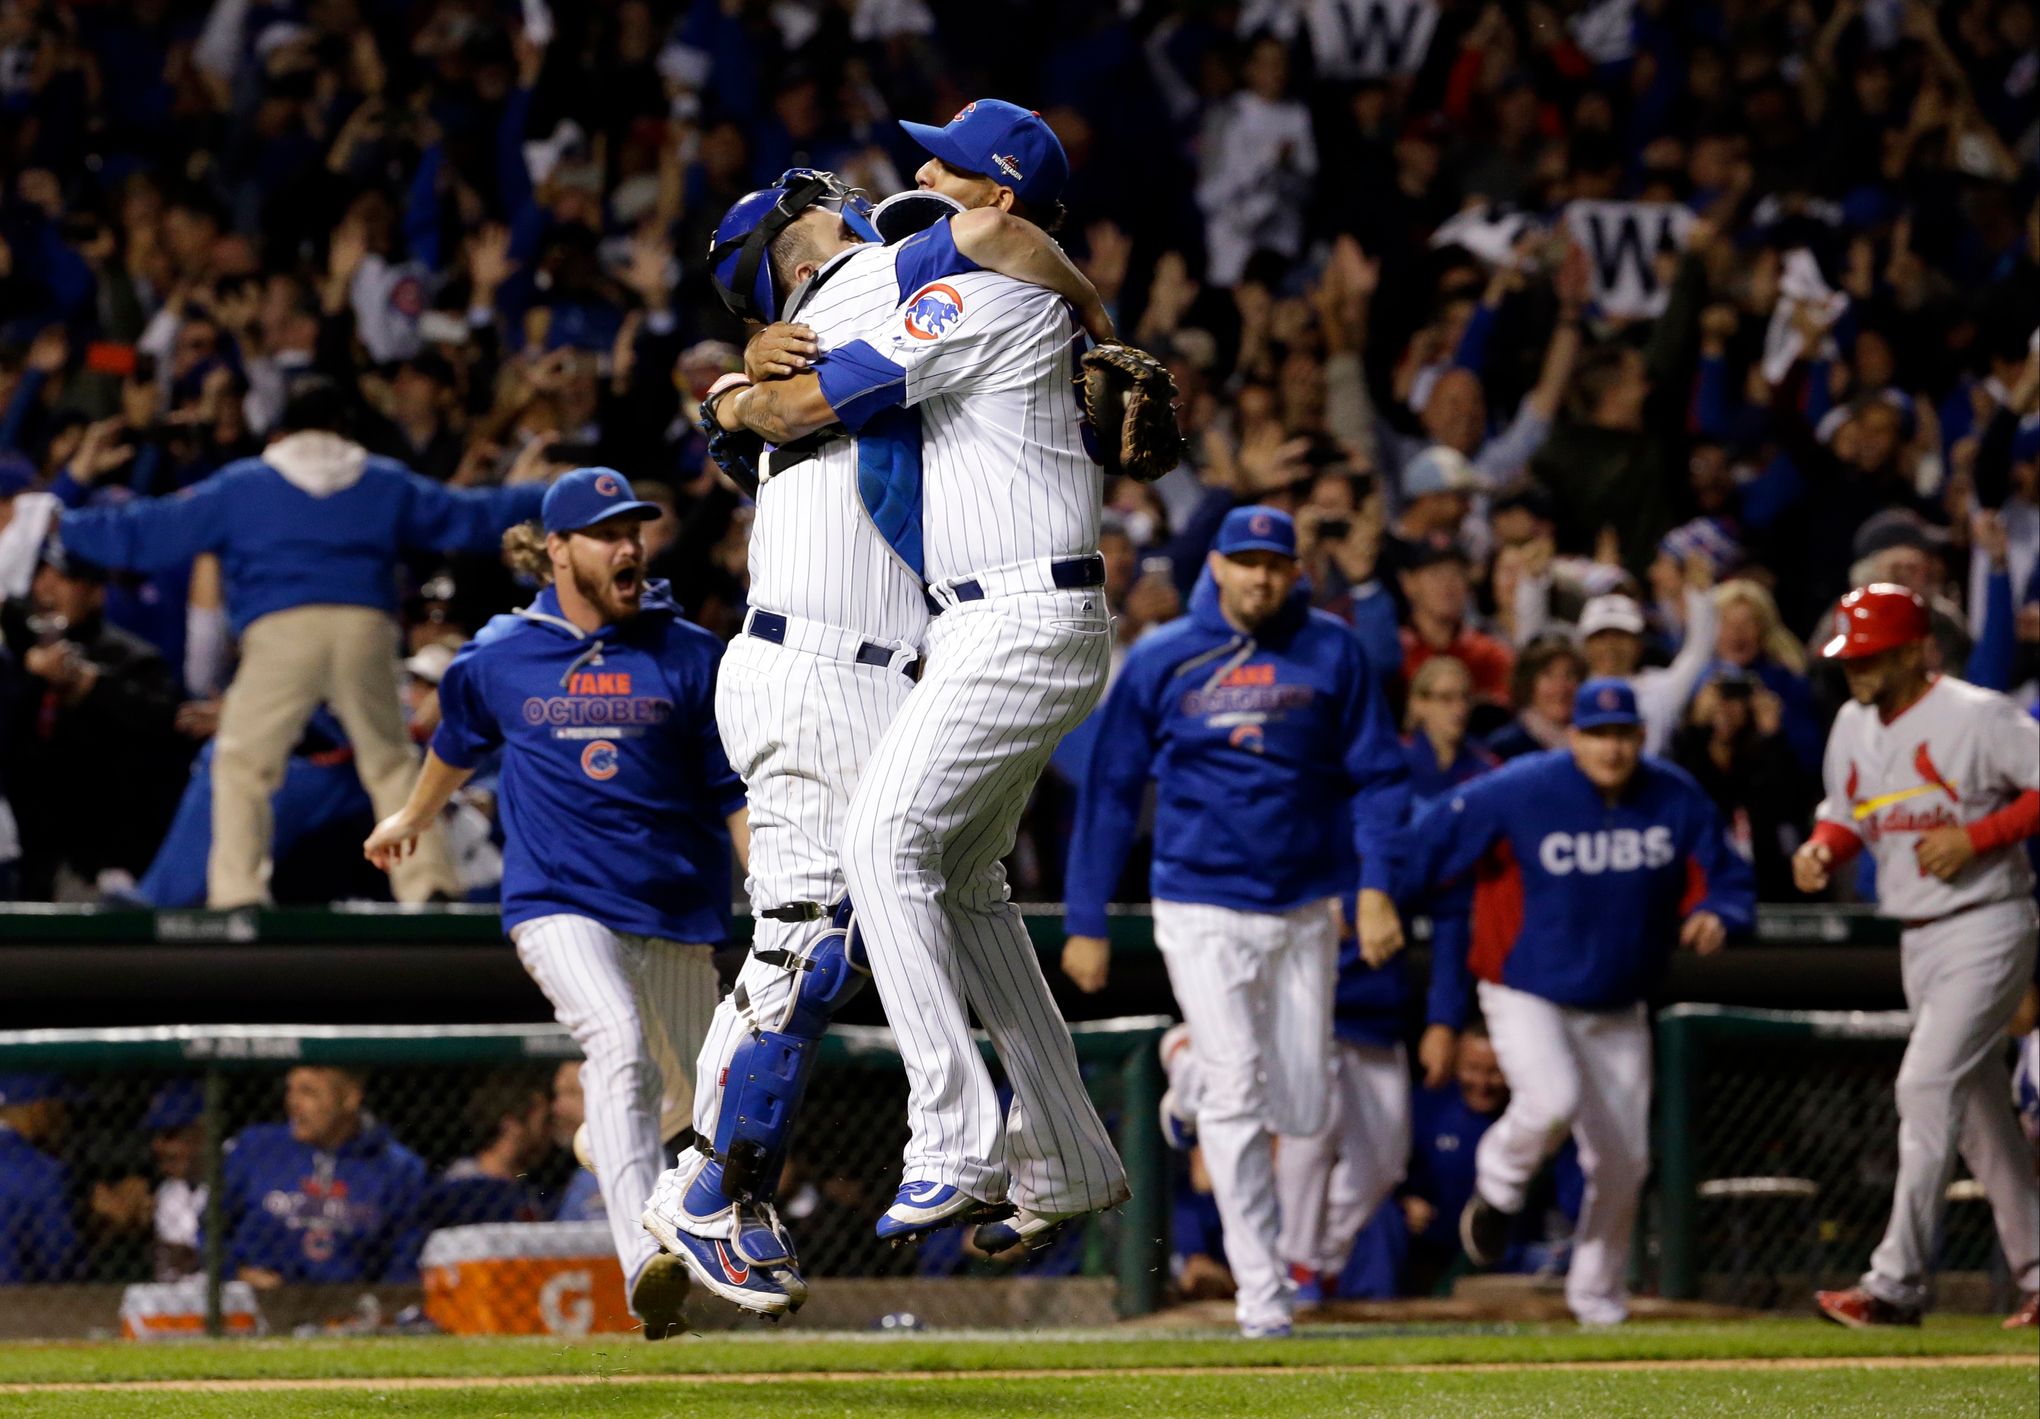 HD wallpaper: cubs, world series, Kris Bryant, happiness, crowd